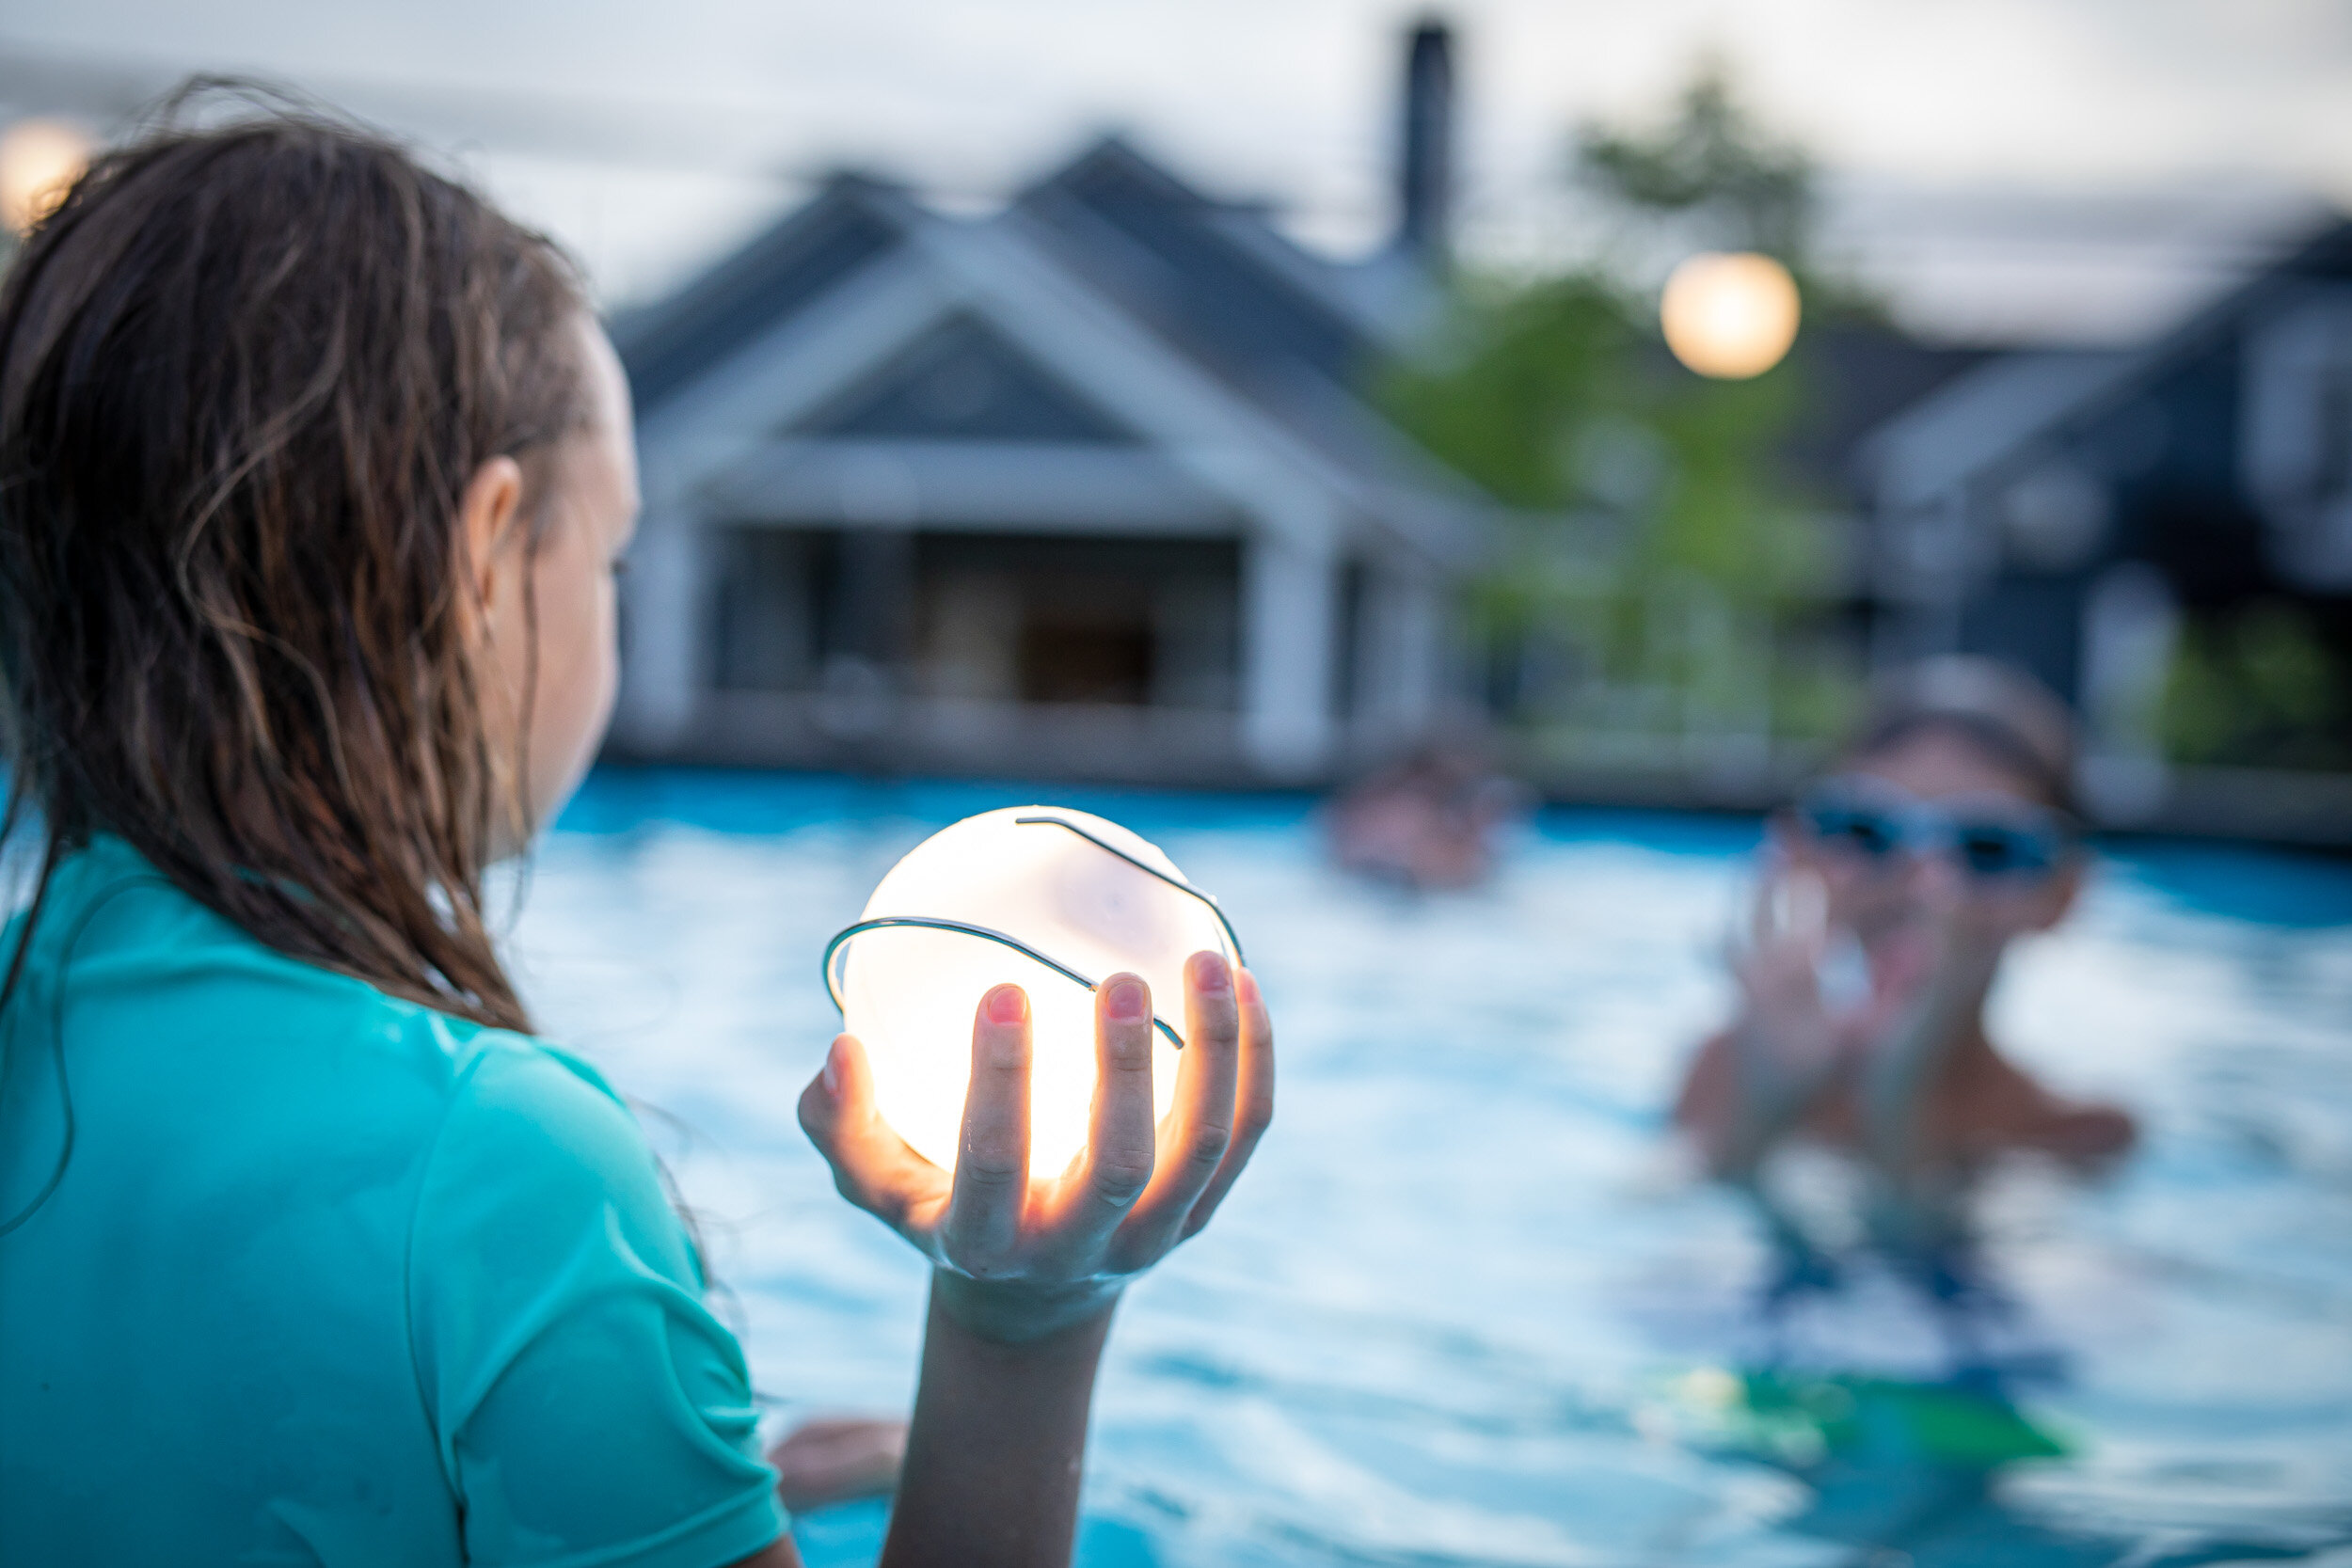 The floating light works as a pretty good ball to toss in the pool, too!